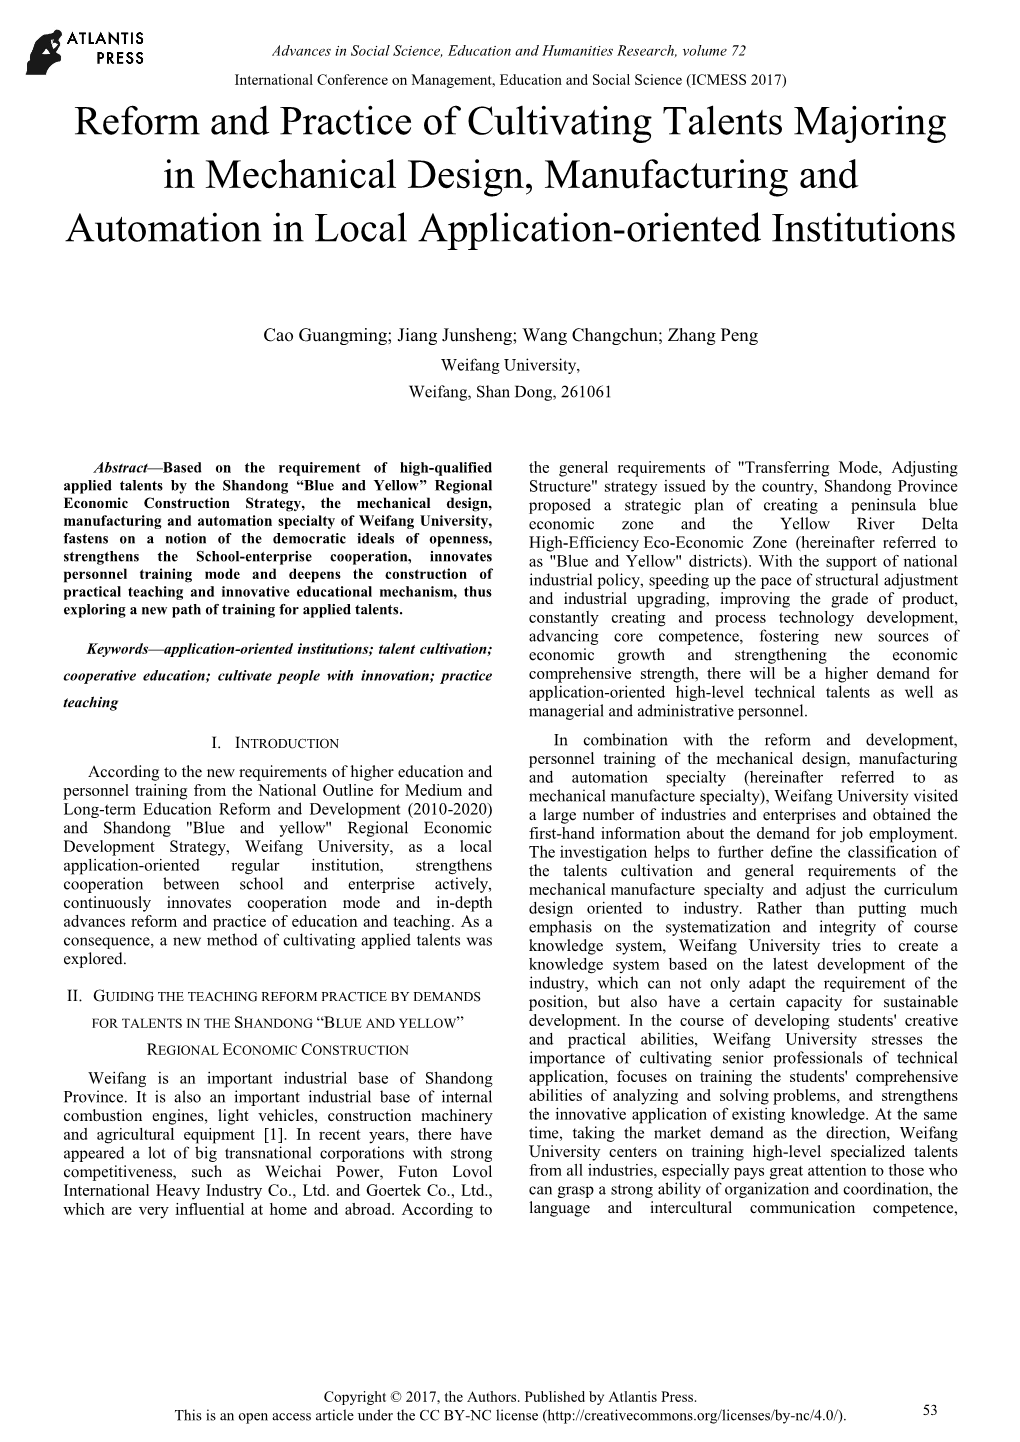 Reform and Practice of Cultivating Talents Majoring in Mechanical Design, Manufacturing and Automation in Local Application-Oriented Institutions